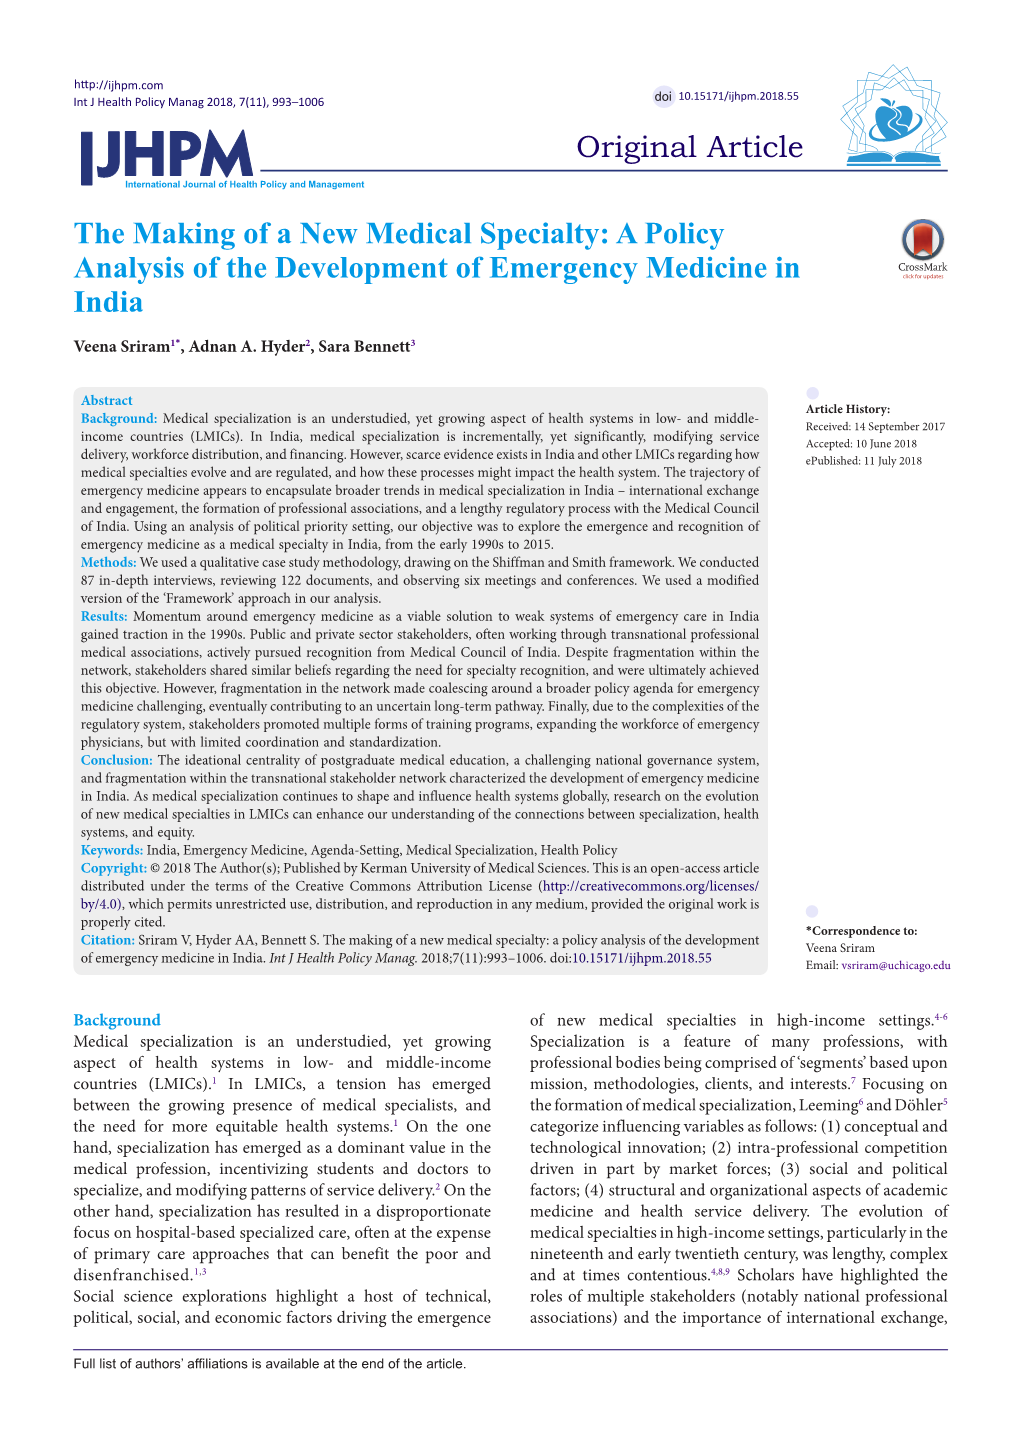 A Policy Analysis of the Development of Emergency Medicine in India